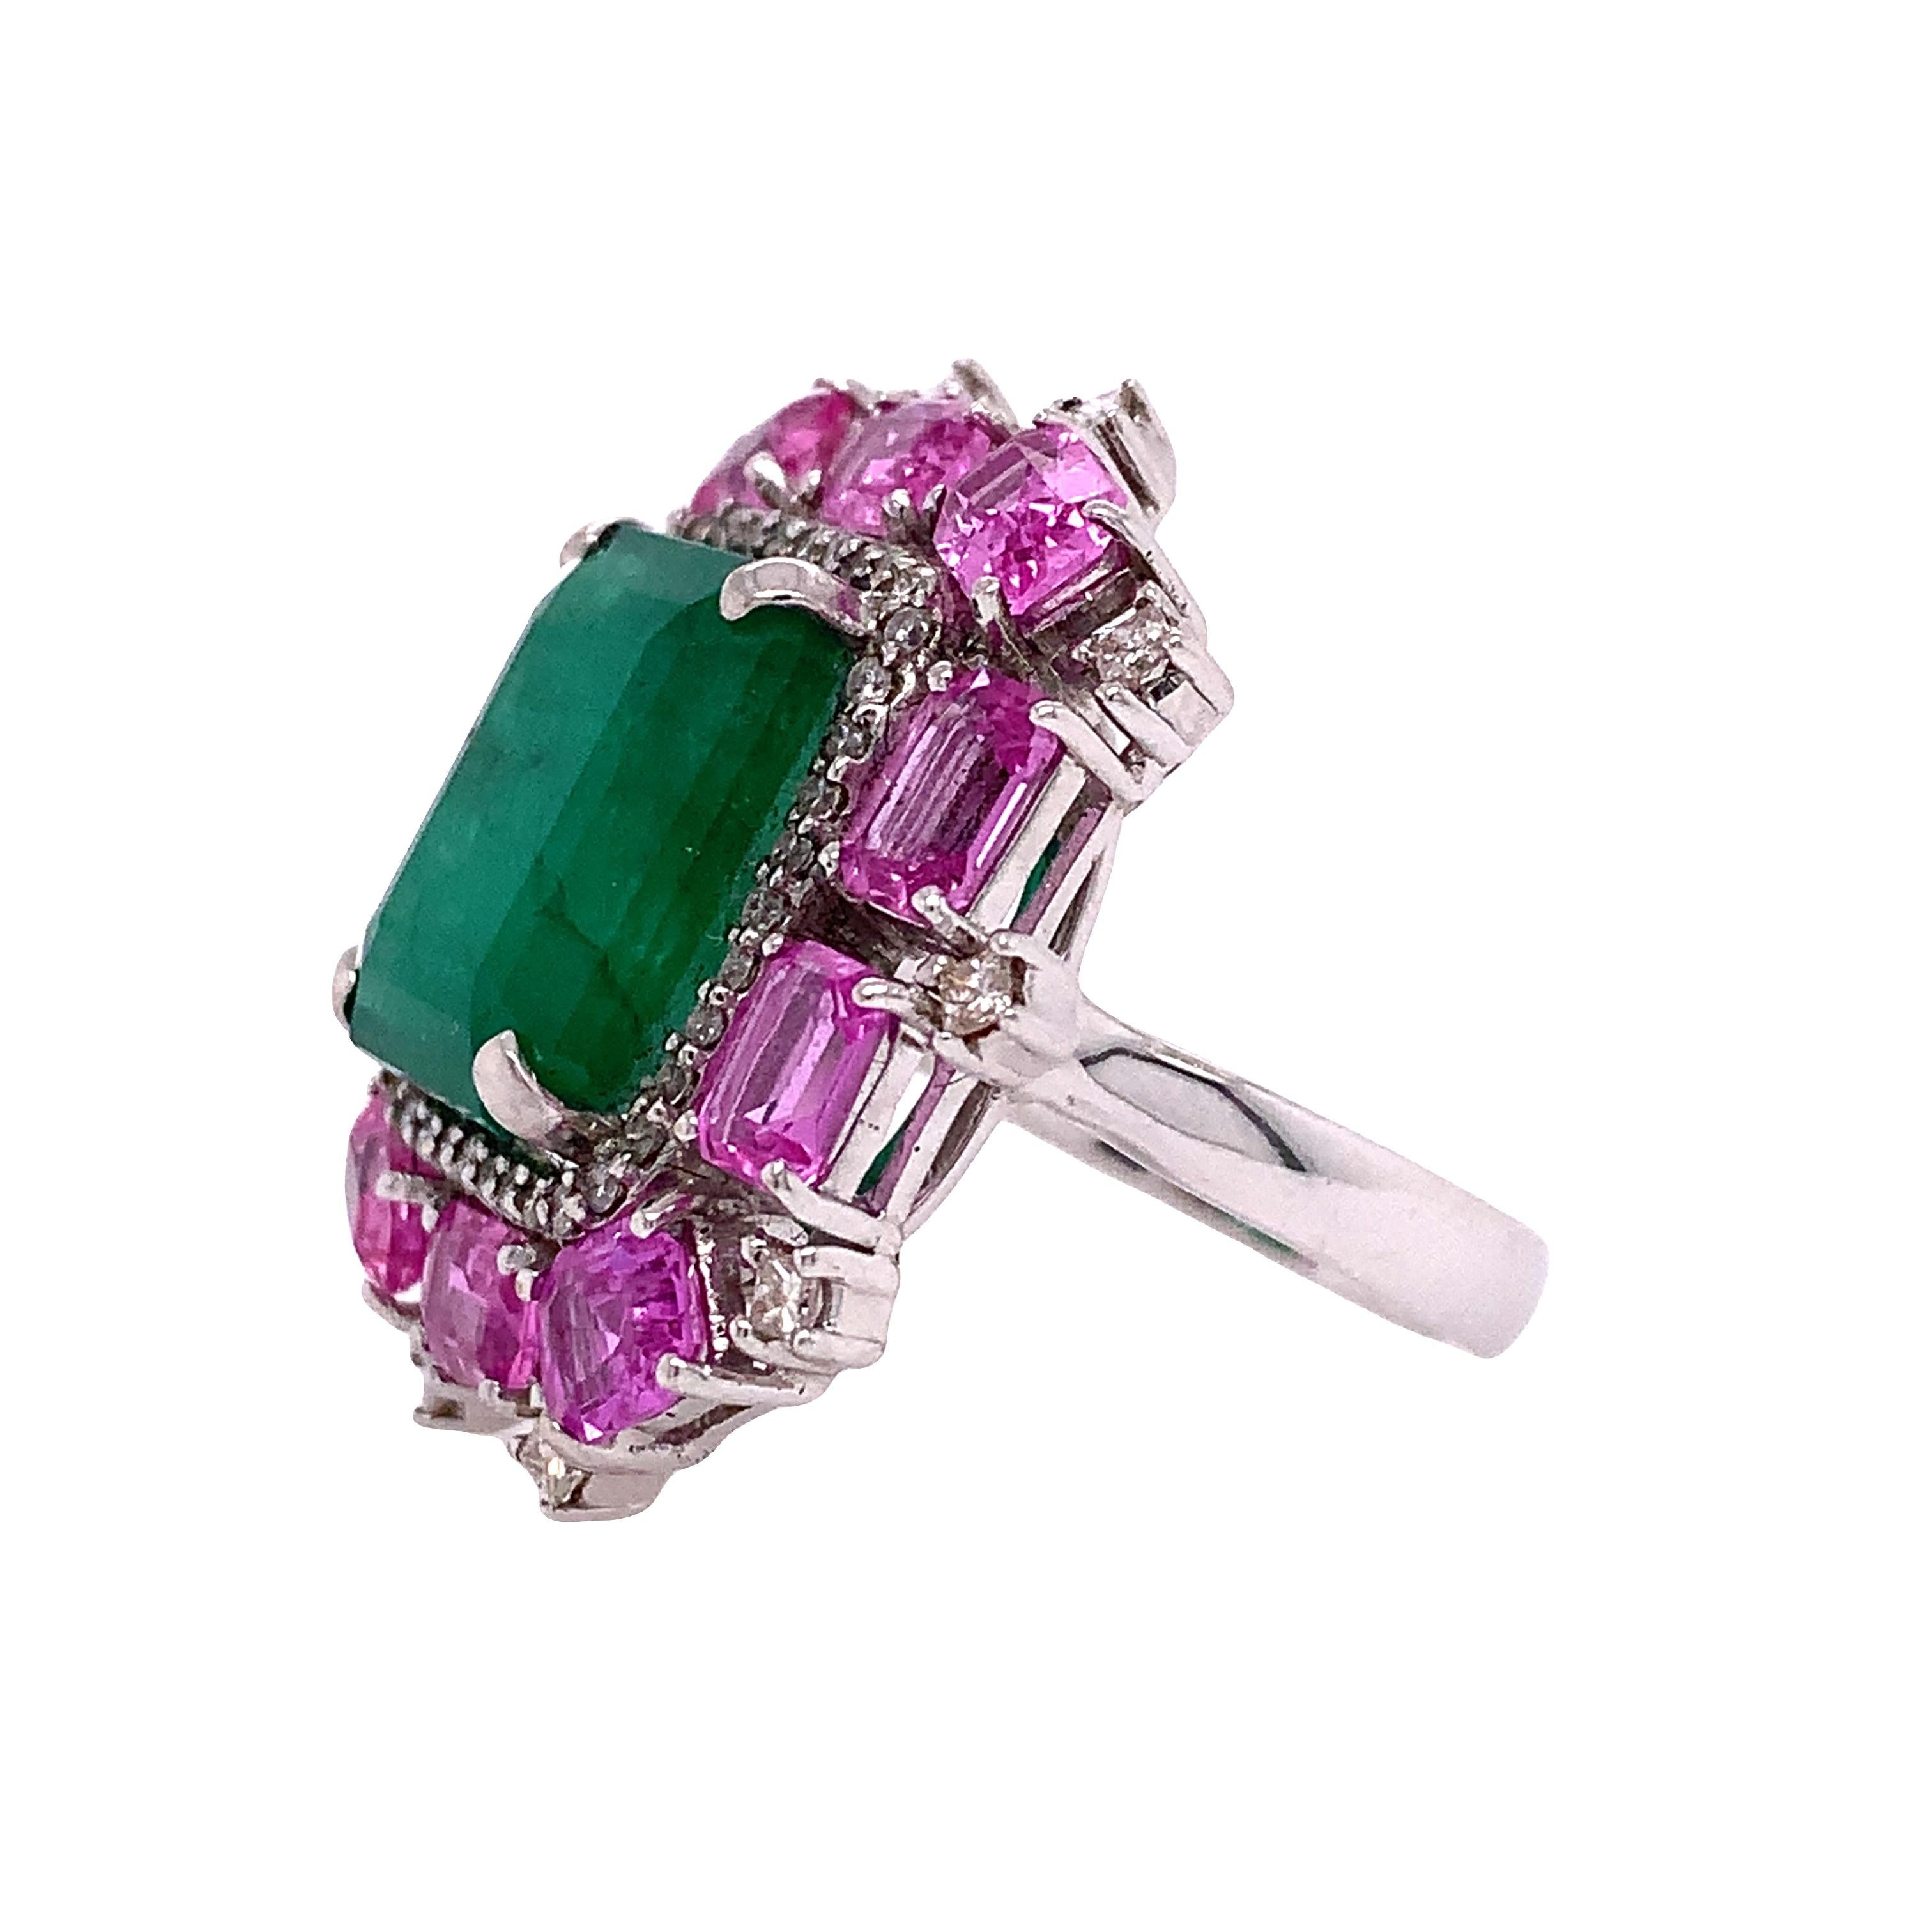 18K White Gold
Emerald: 9.35ct total weight
Pink Sapphire: 5.08ct total weight
Diamond: 0.62ct total weight
All diamonds are G-H/ SI stones